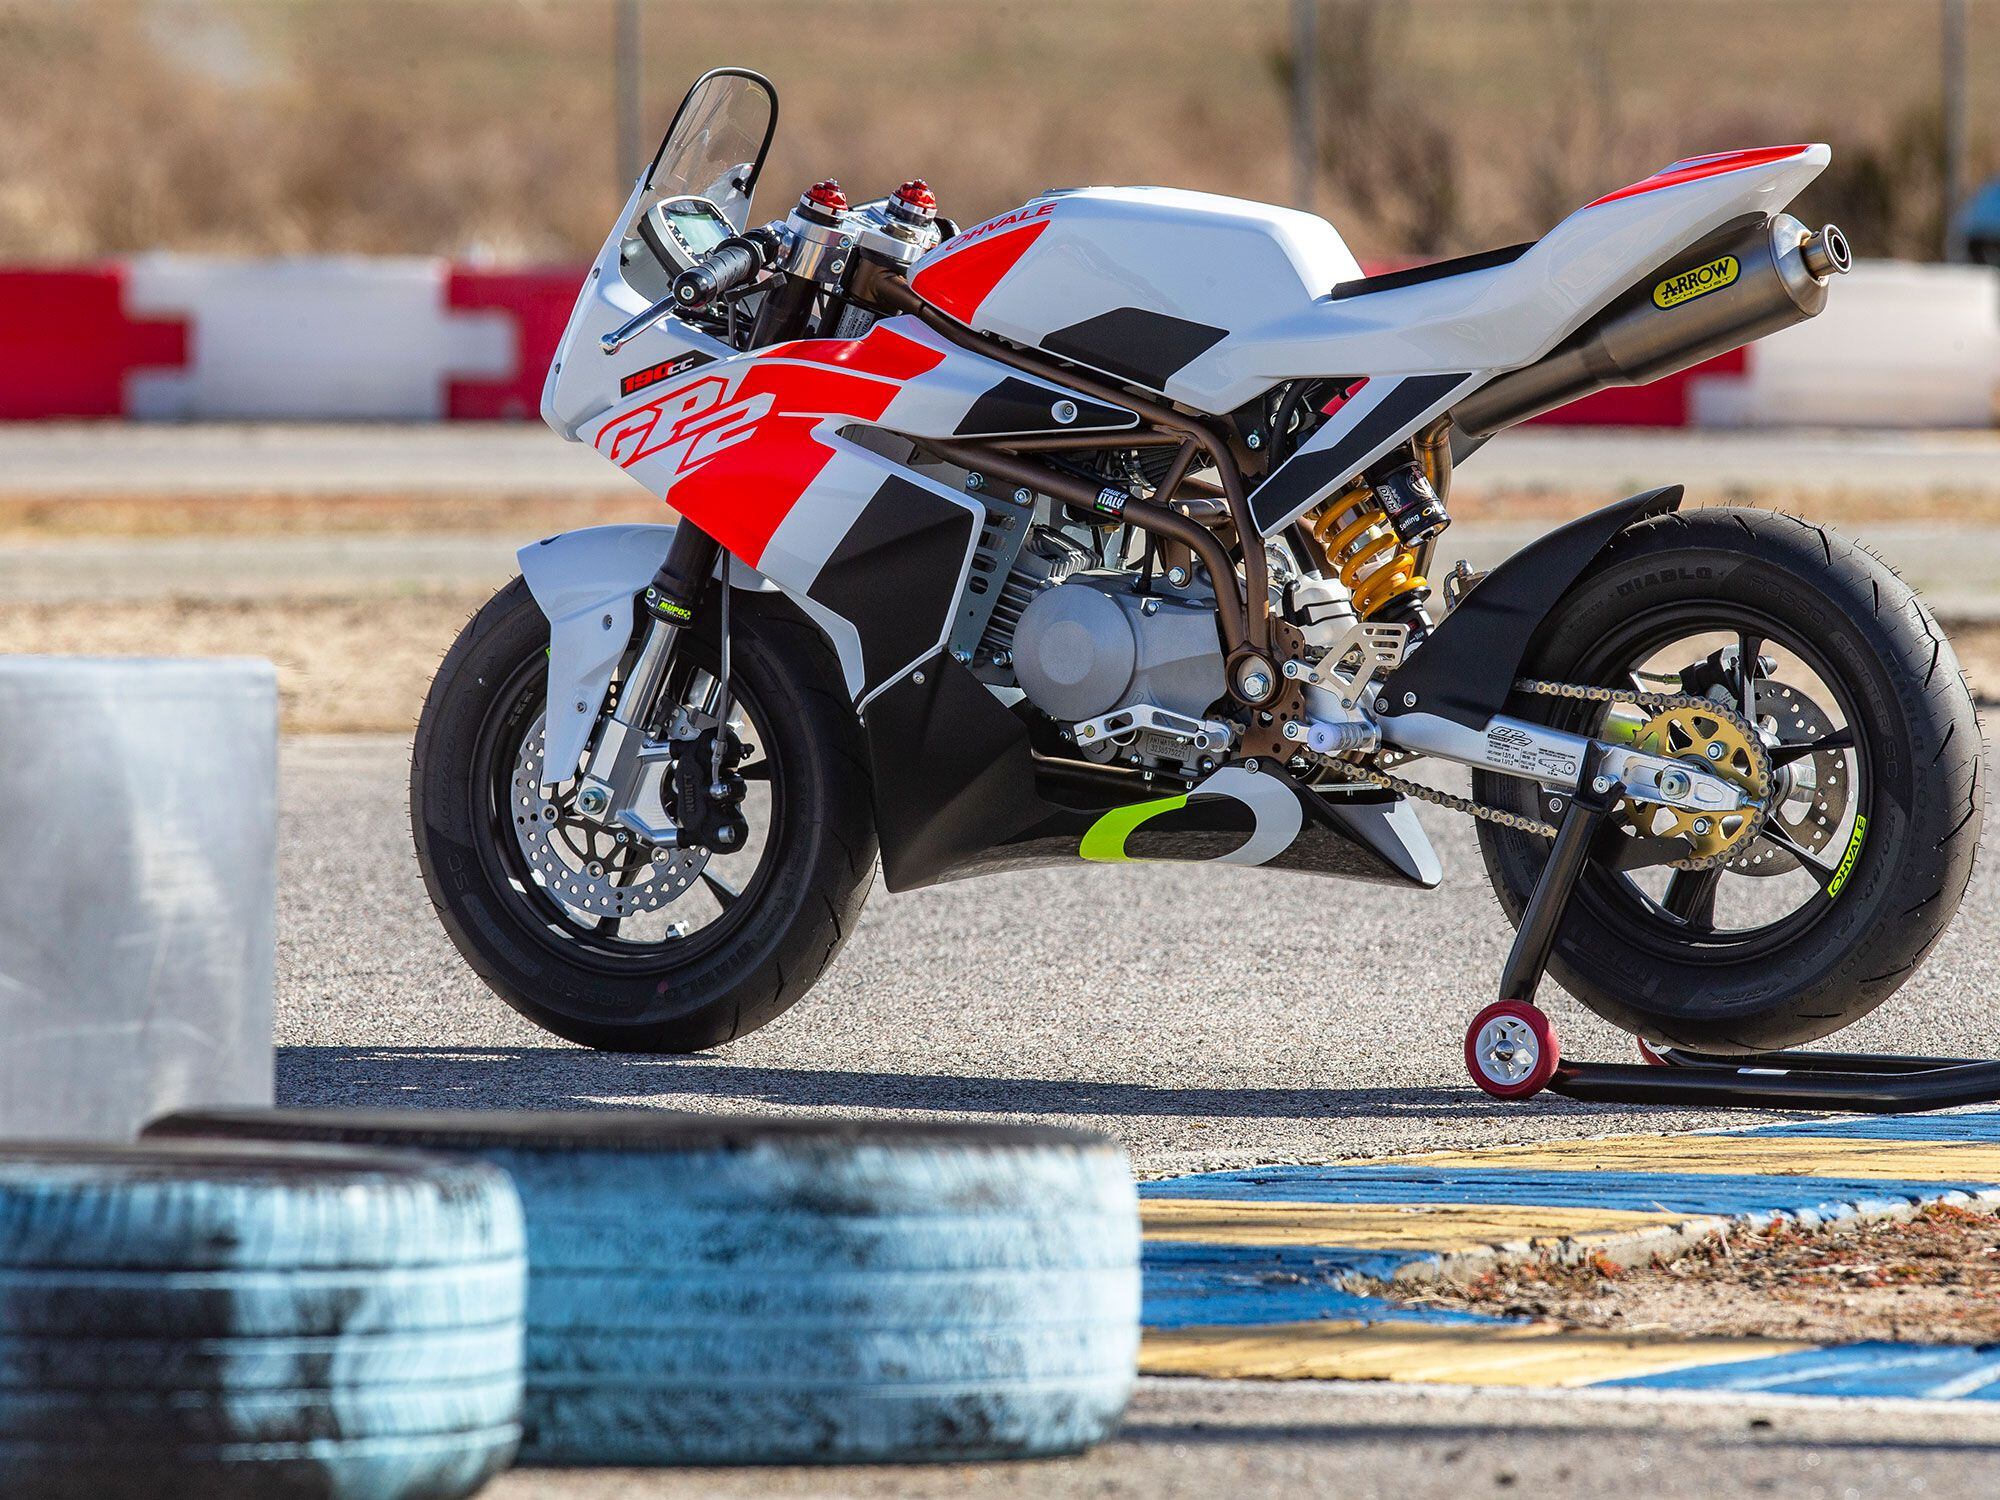 The Ohvale GP-2 190 is a scaled-down racebike capable of providing invaluable riding experience, but comes at a steep cost. It retails for $6,499 through Ohvale’s US importer, Rise Moto.